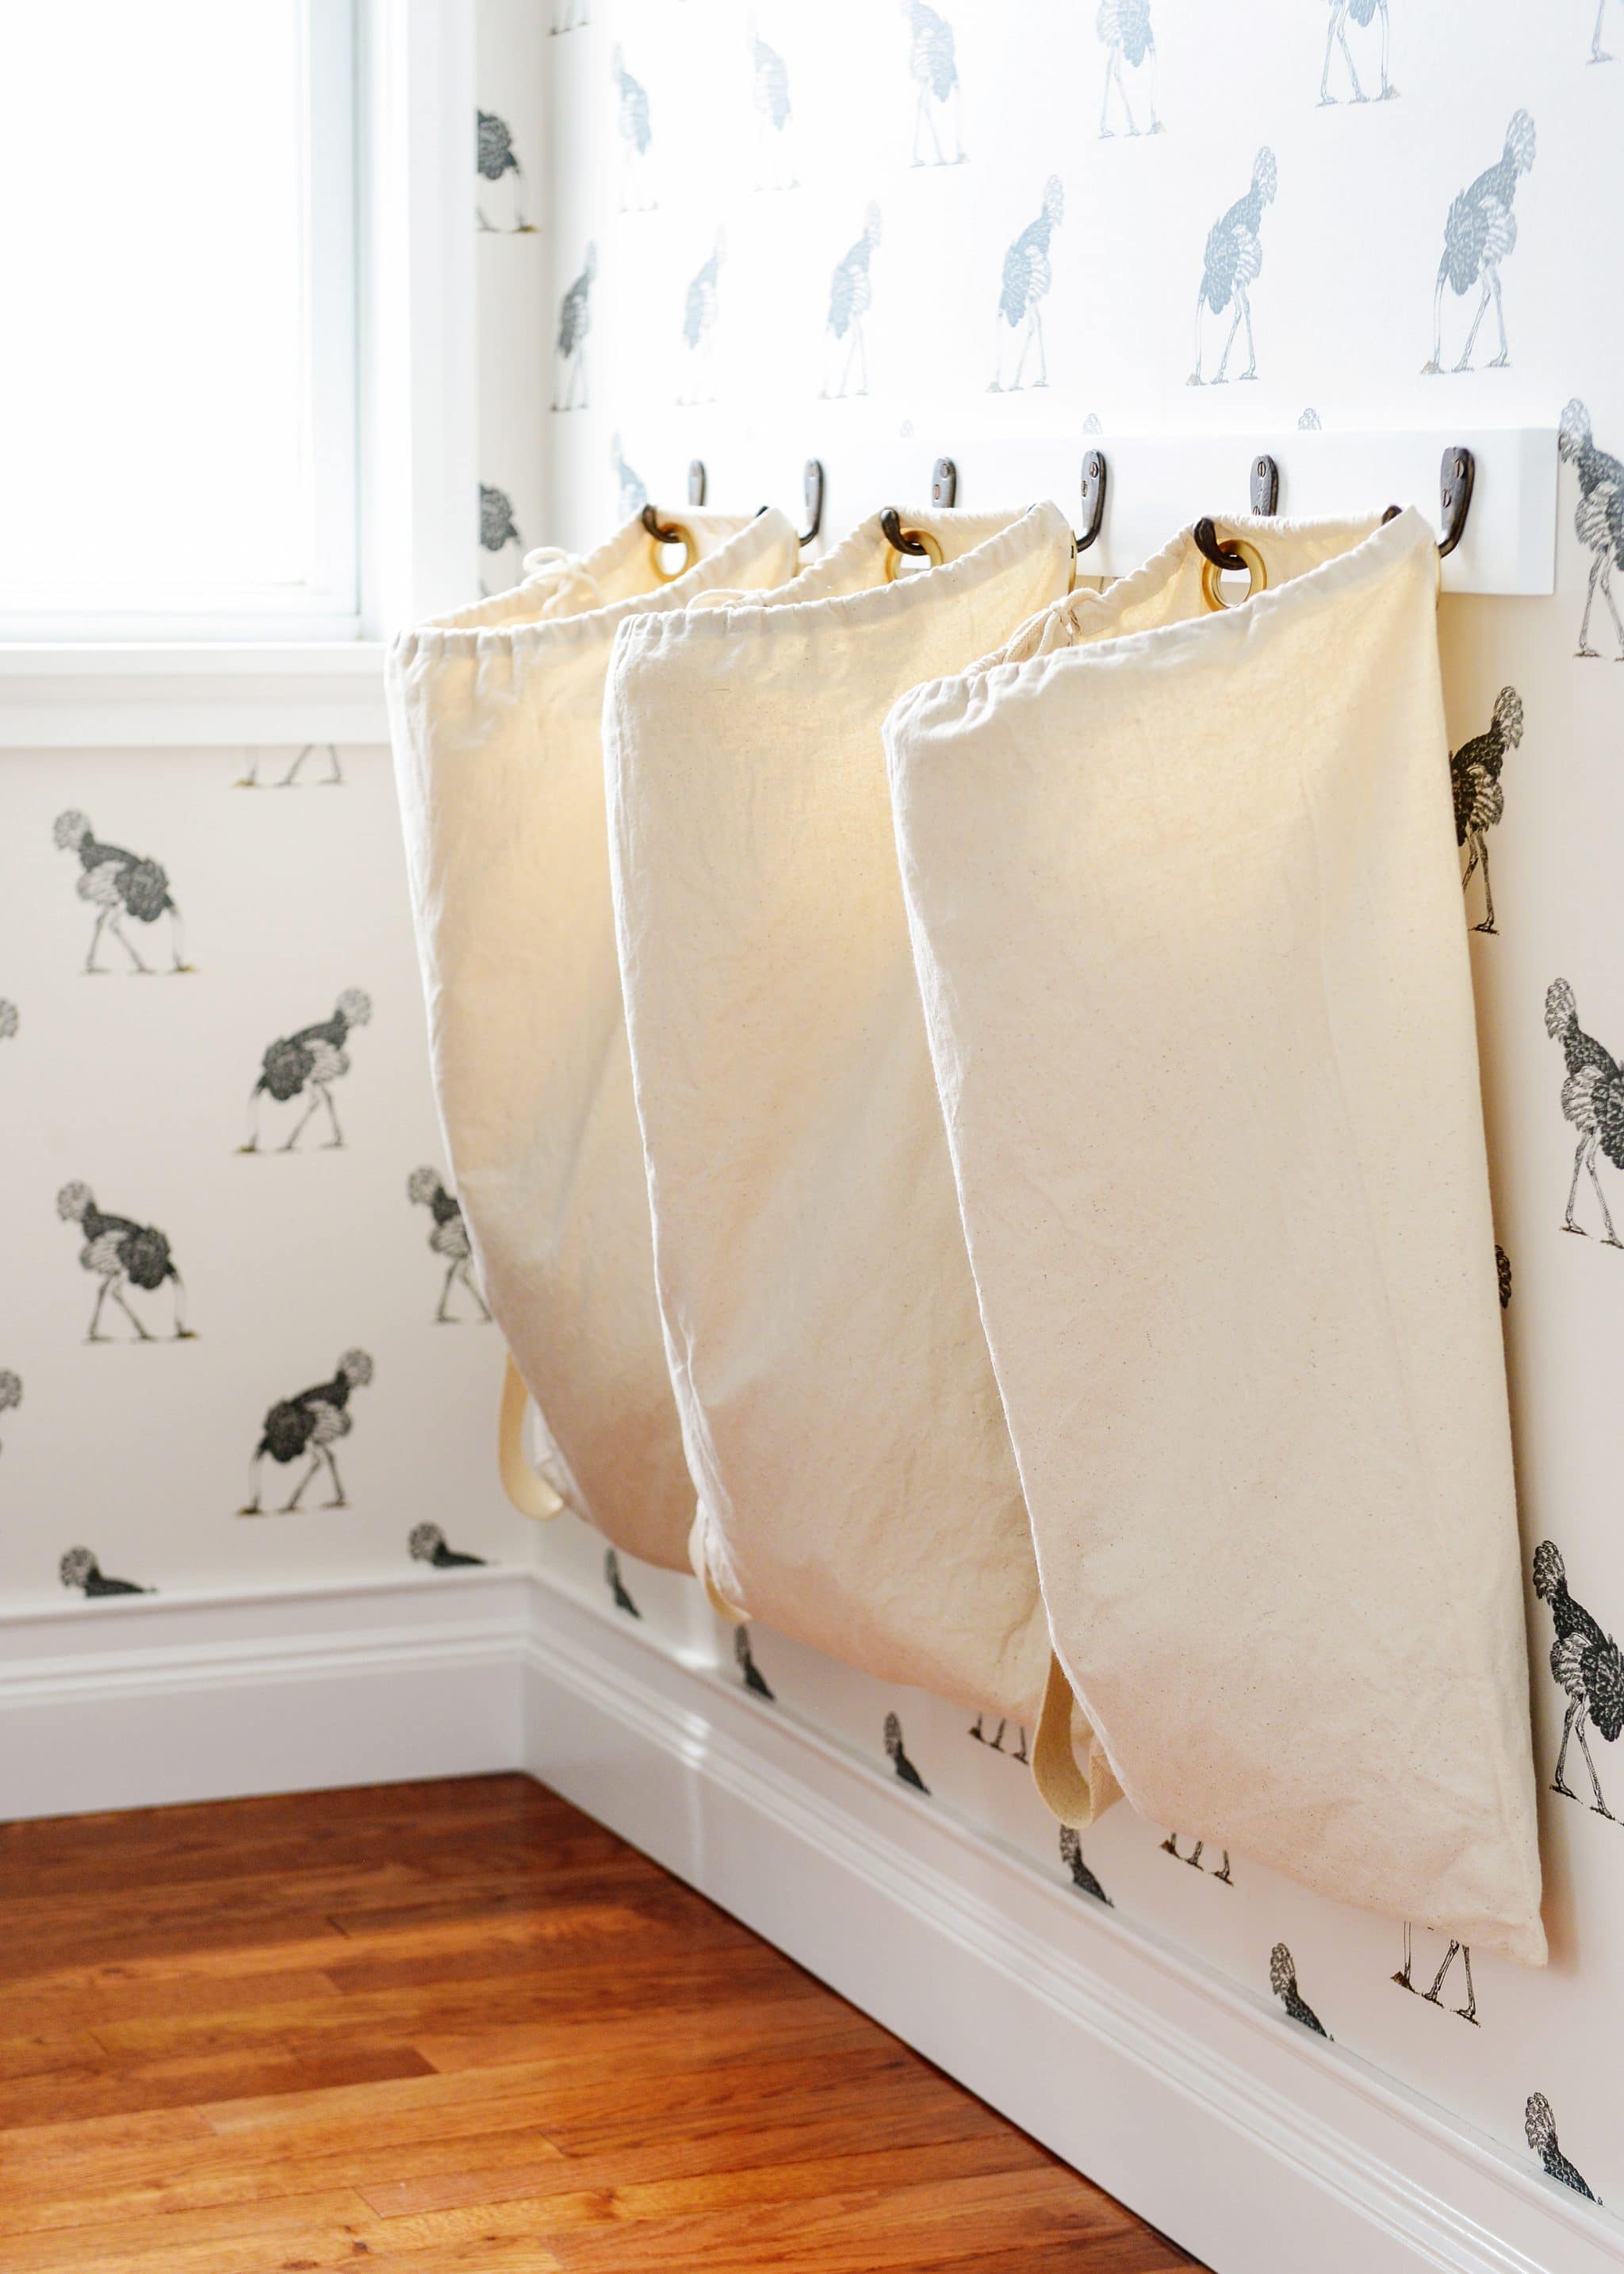 The finished result! | A DIY Laundry Sorter Solution, via Yellow Brick Home